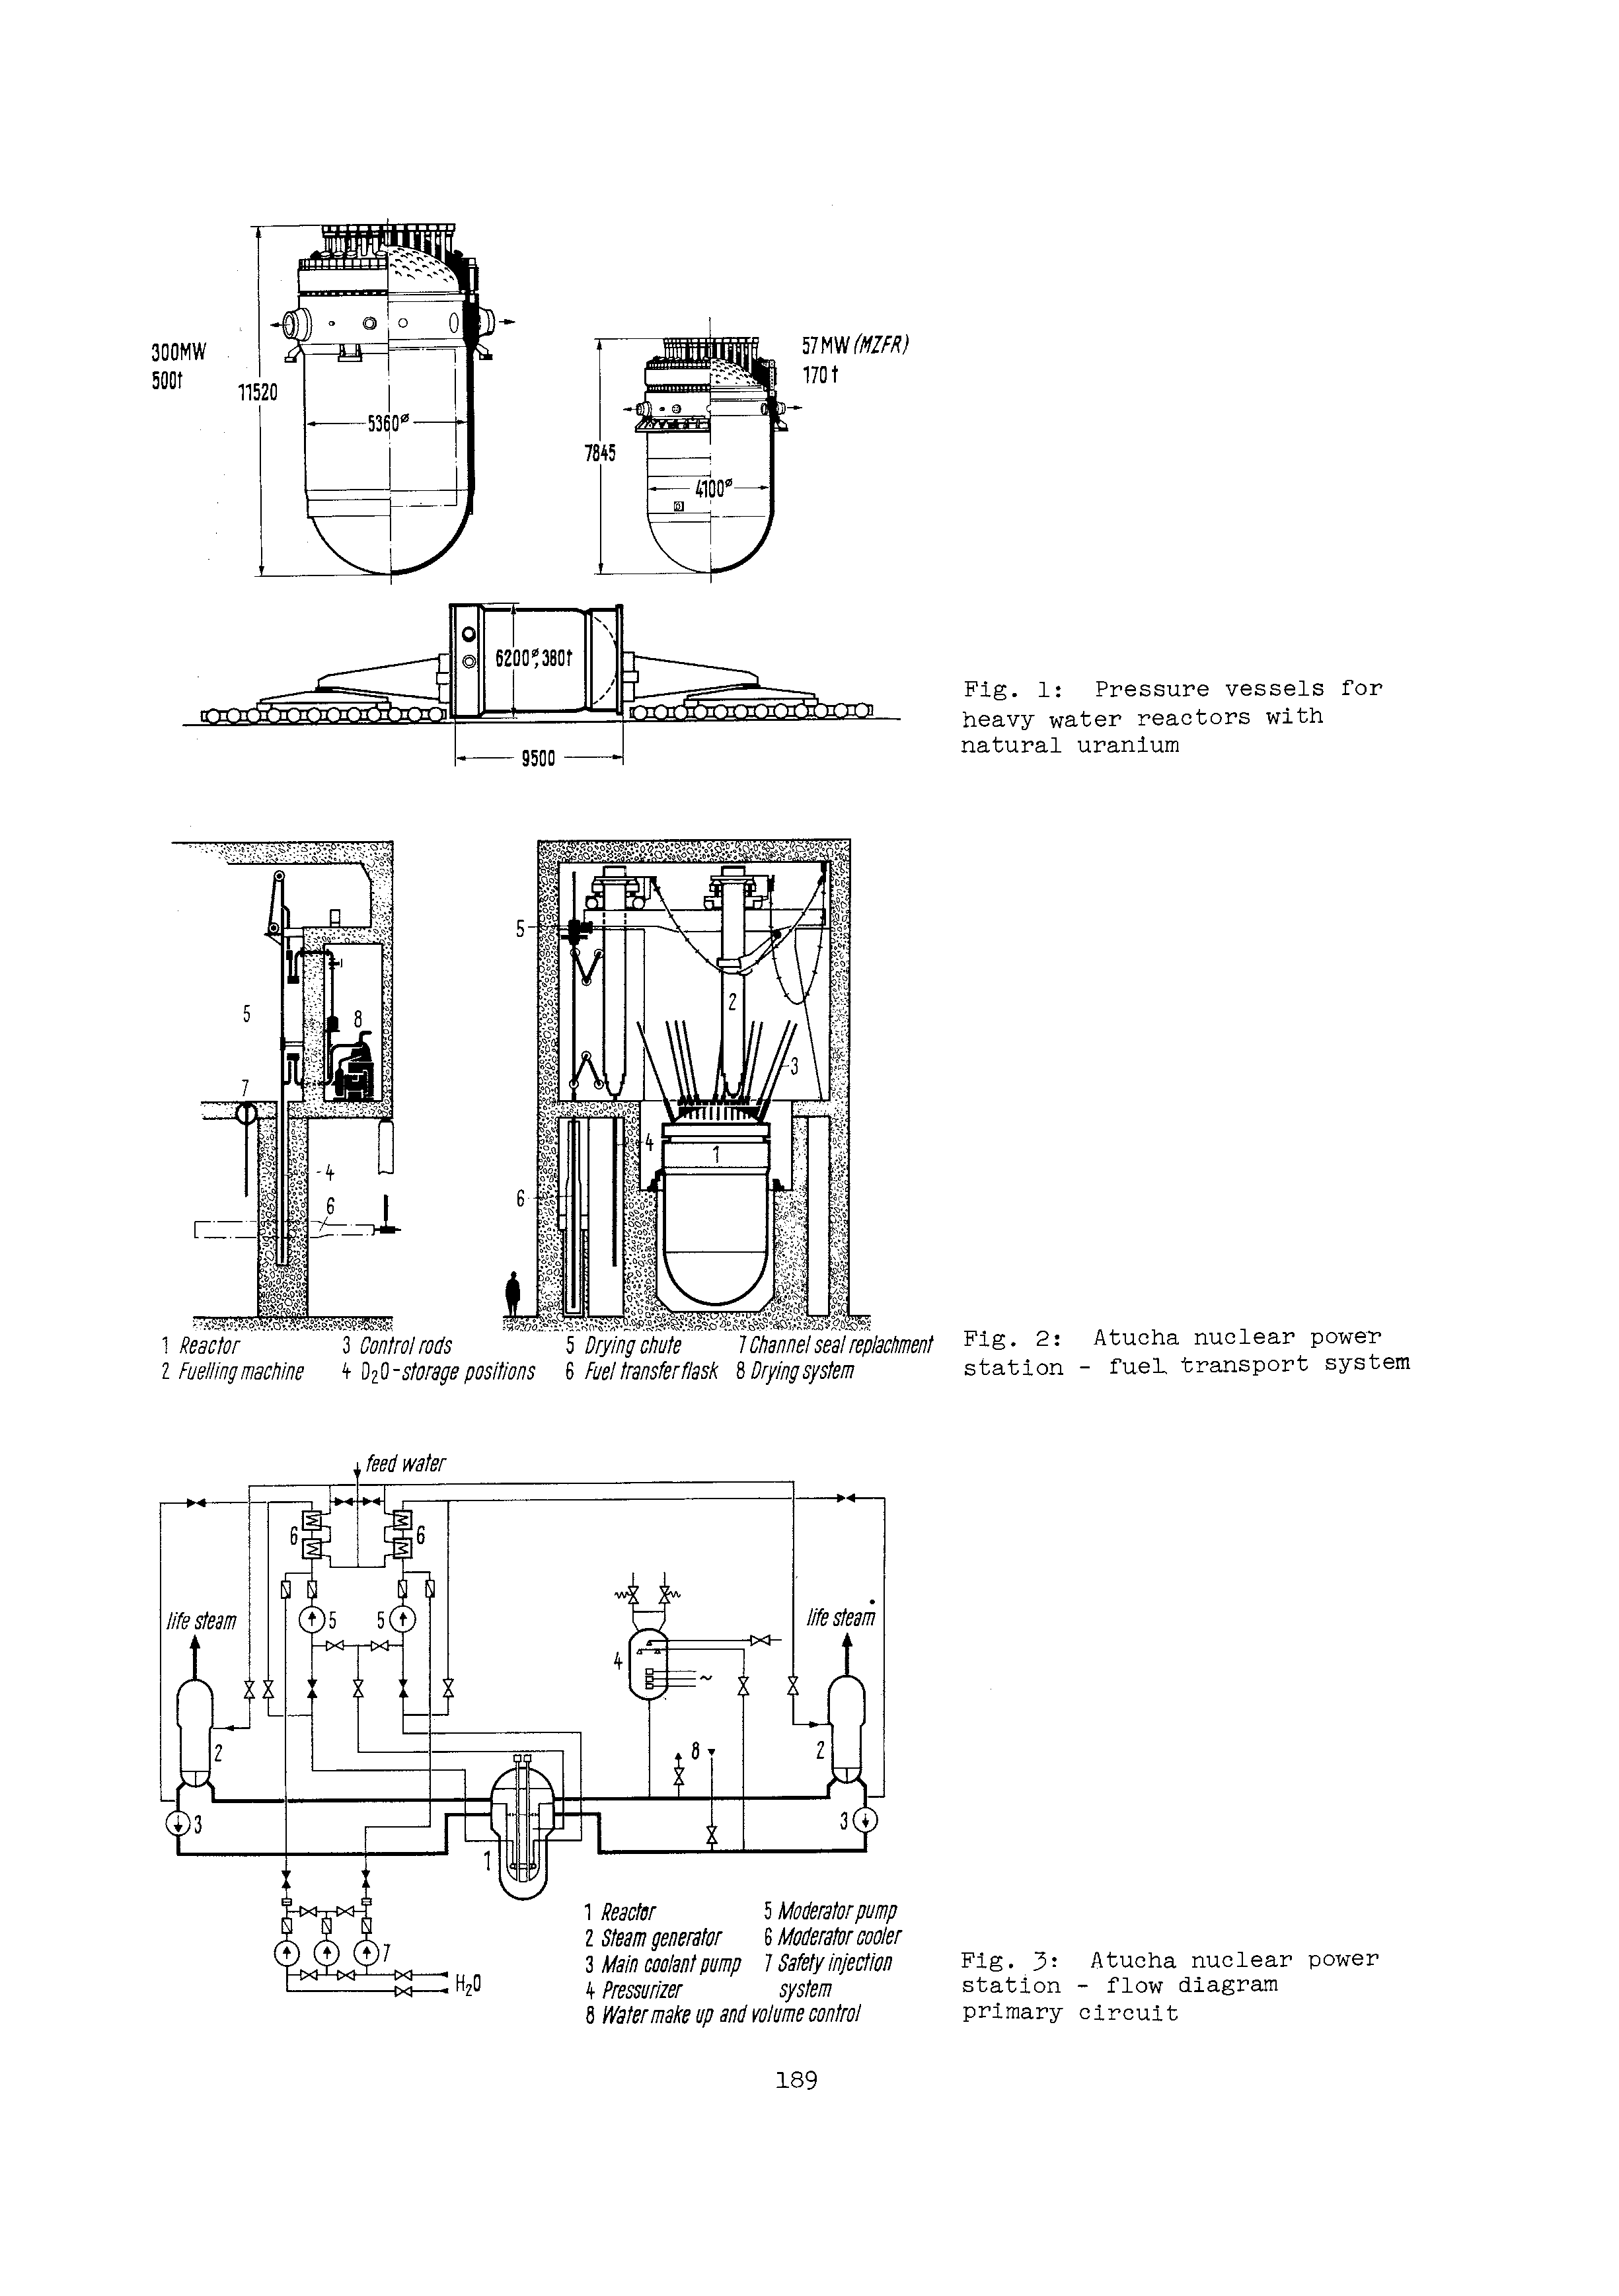 Fig. 1 Pressure vessels for heavy water reactors with natural uranium...